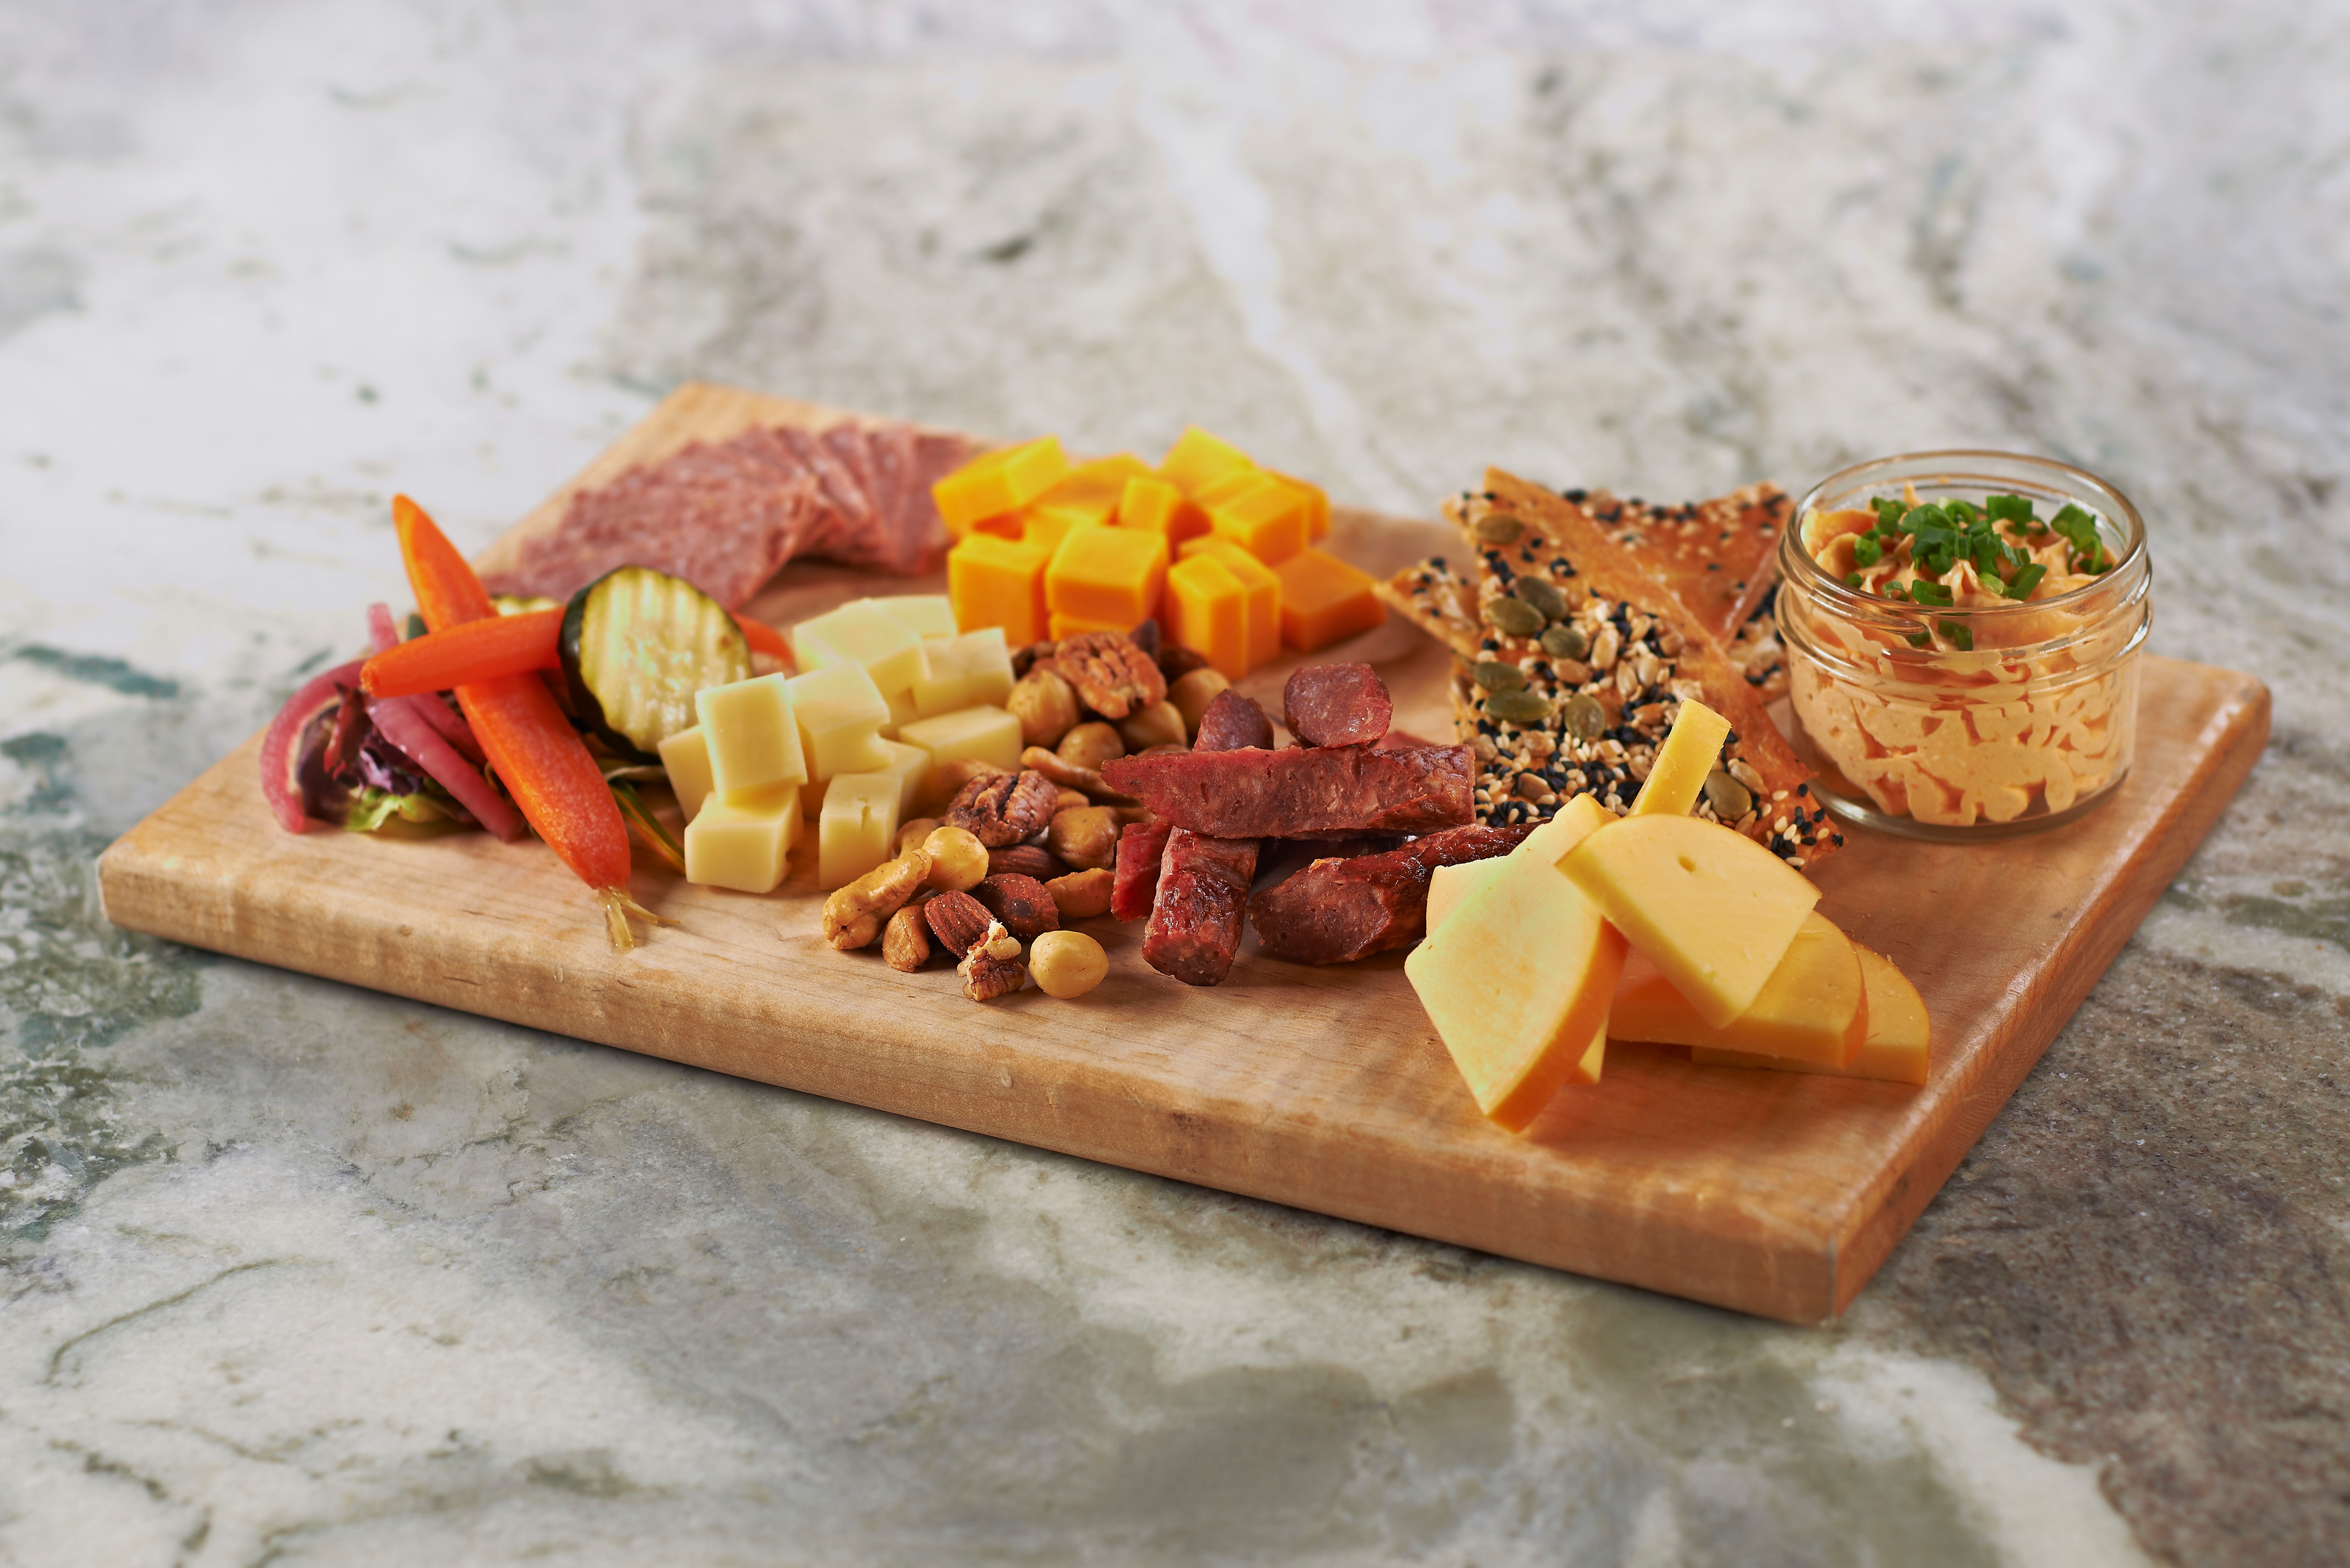 Charcuterie board with meats and cheese.